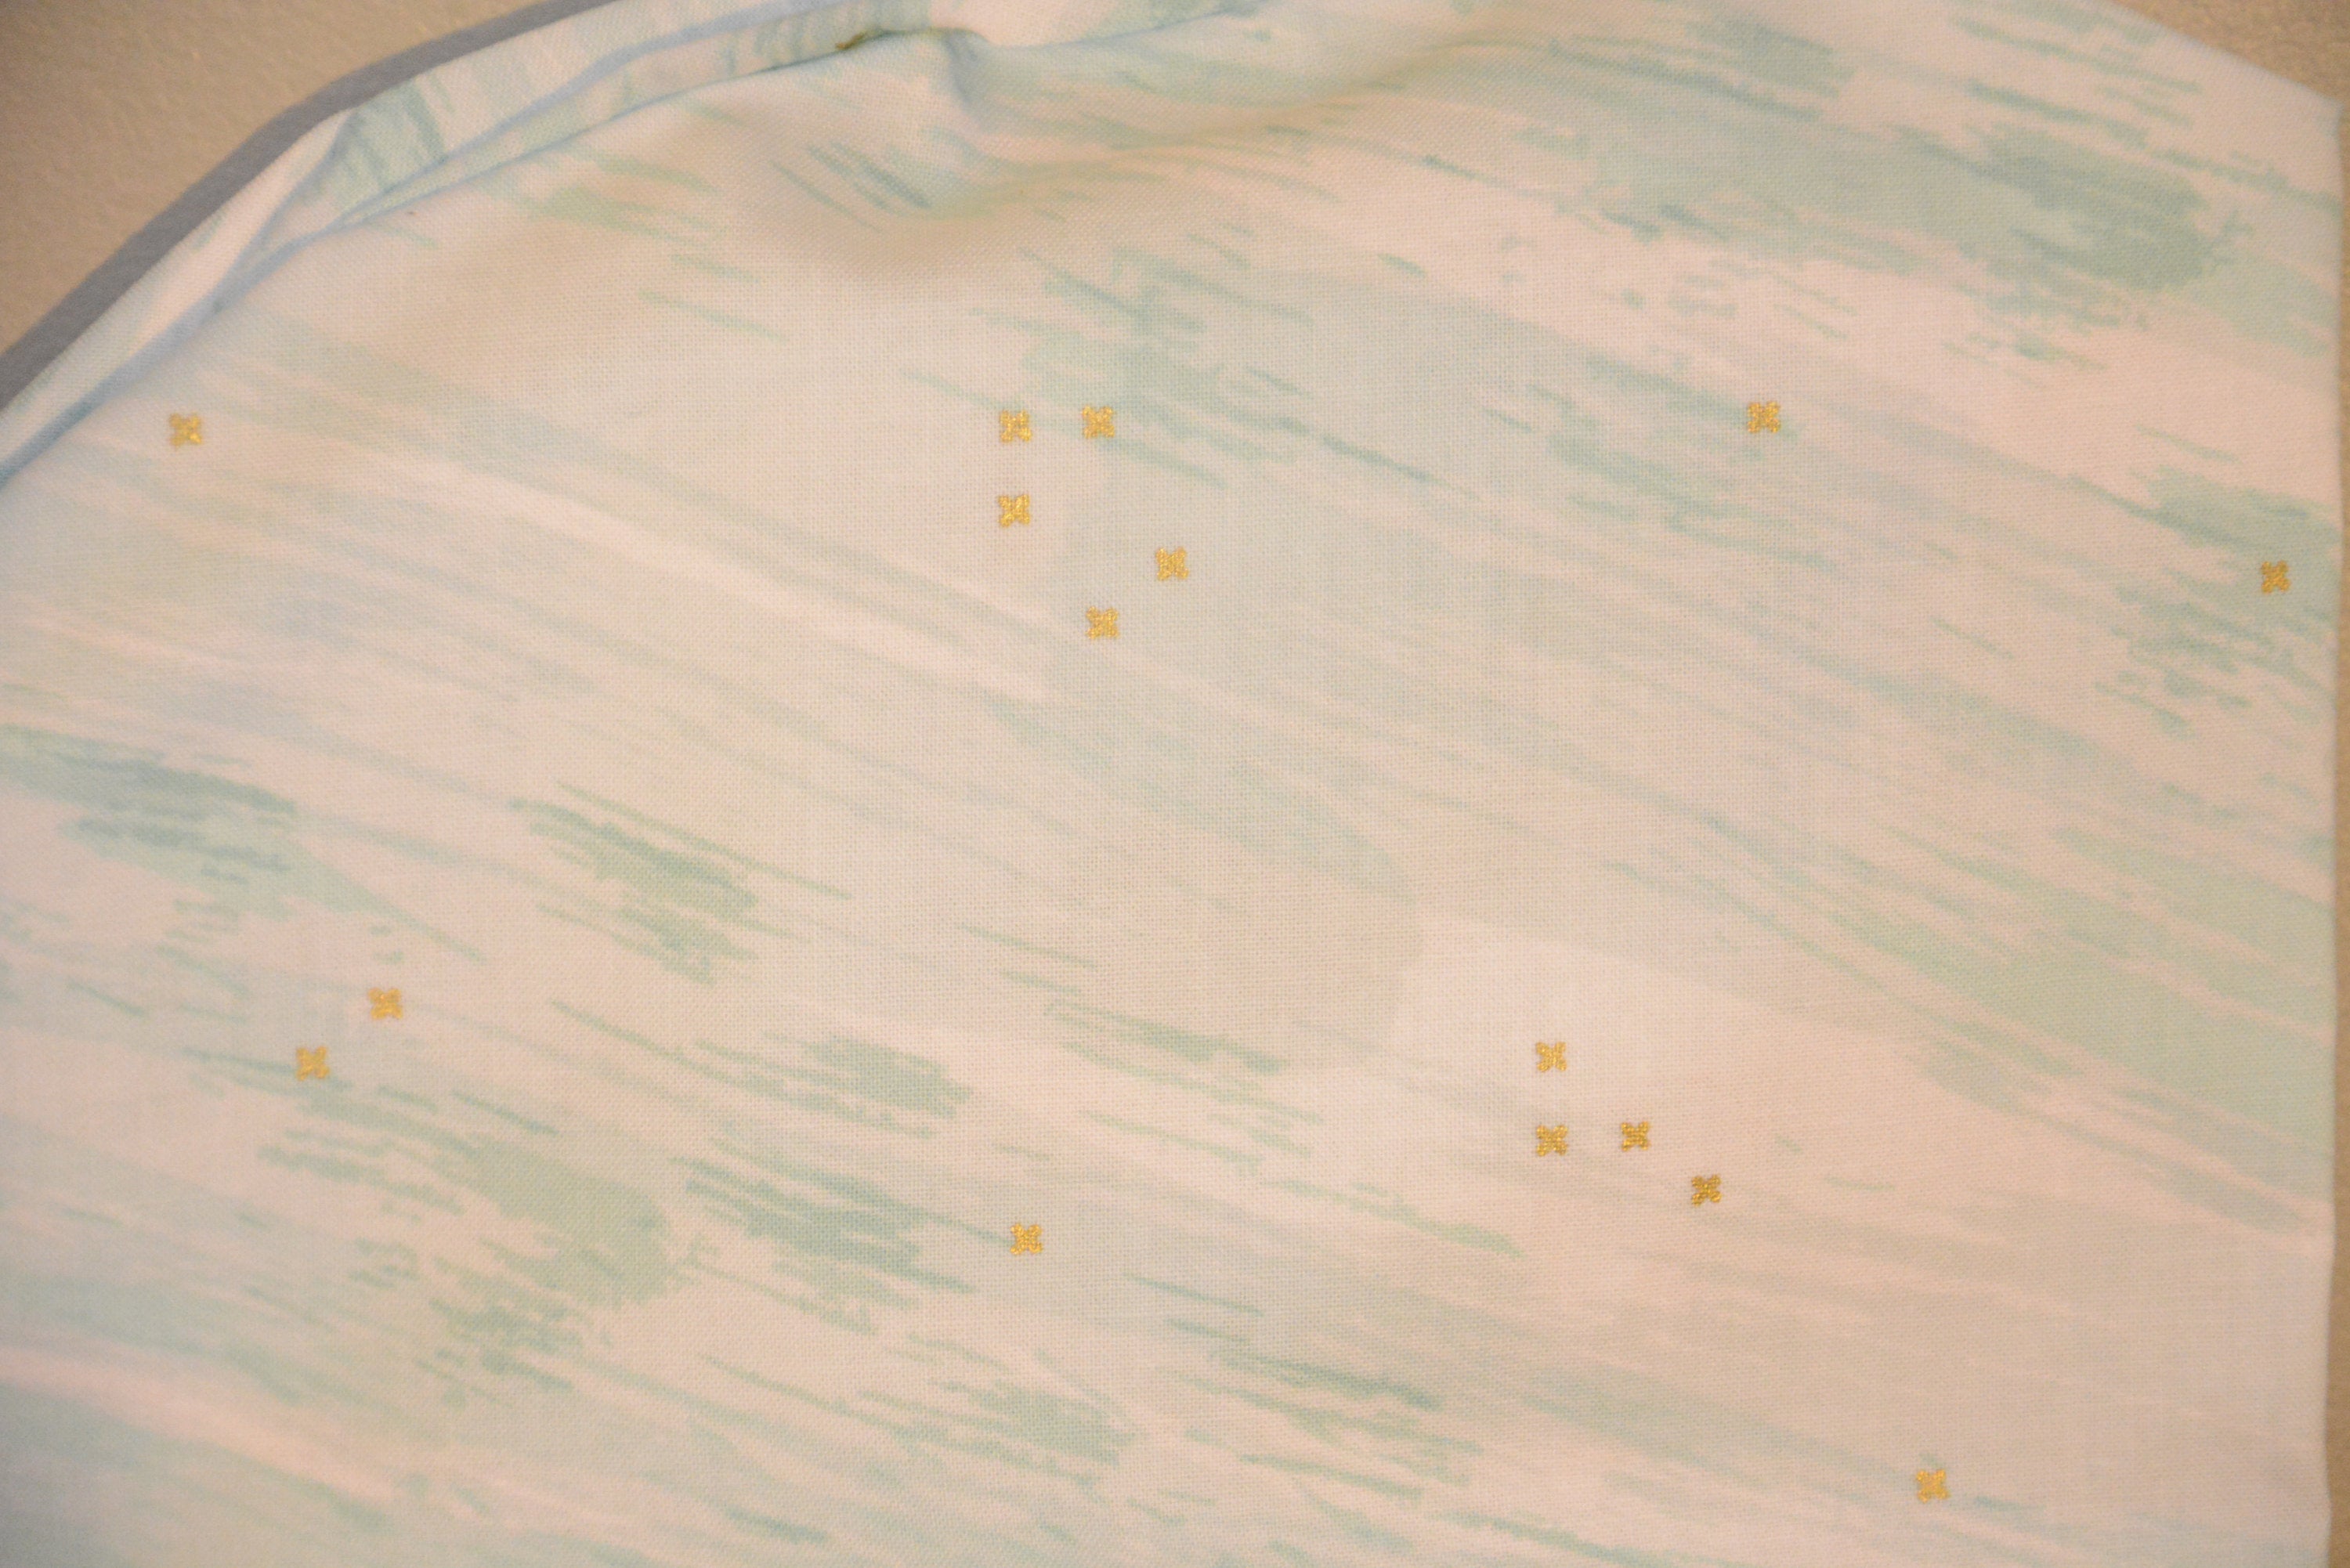 Golden Stars in Teal Clouds